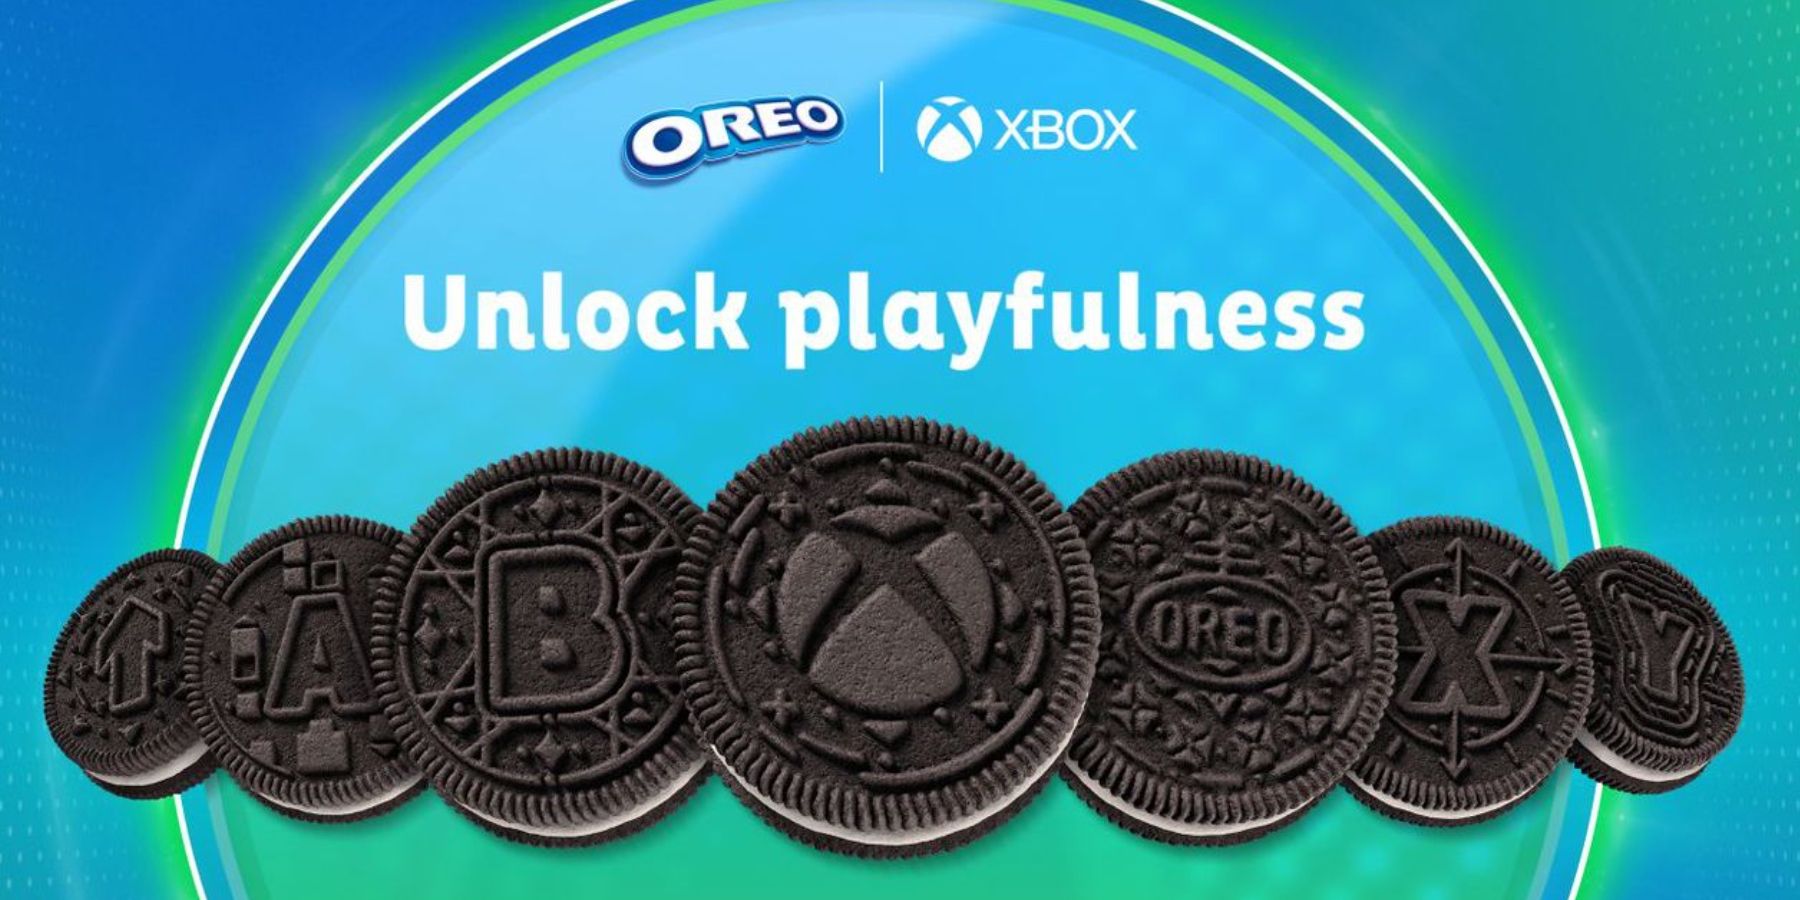 5. Oreo Collect to Win Game Code - wide 5